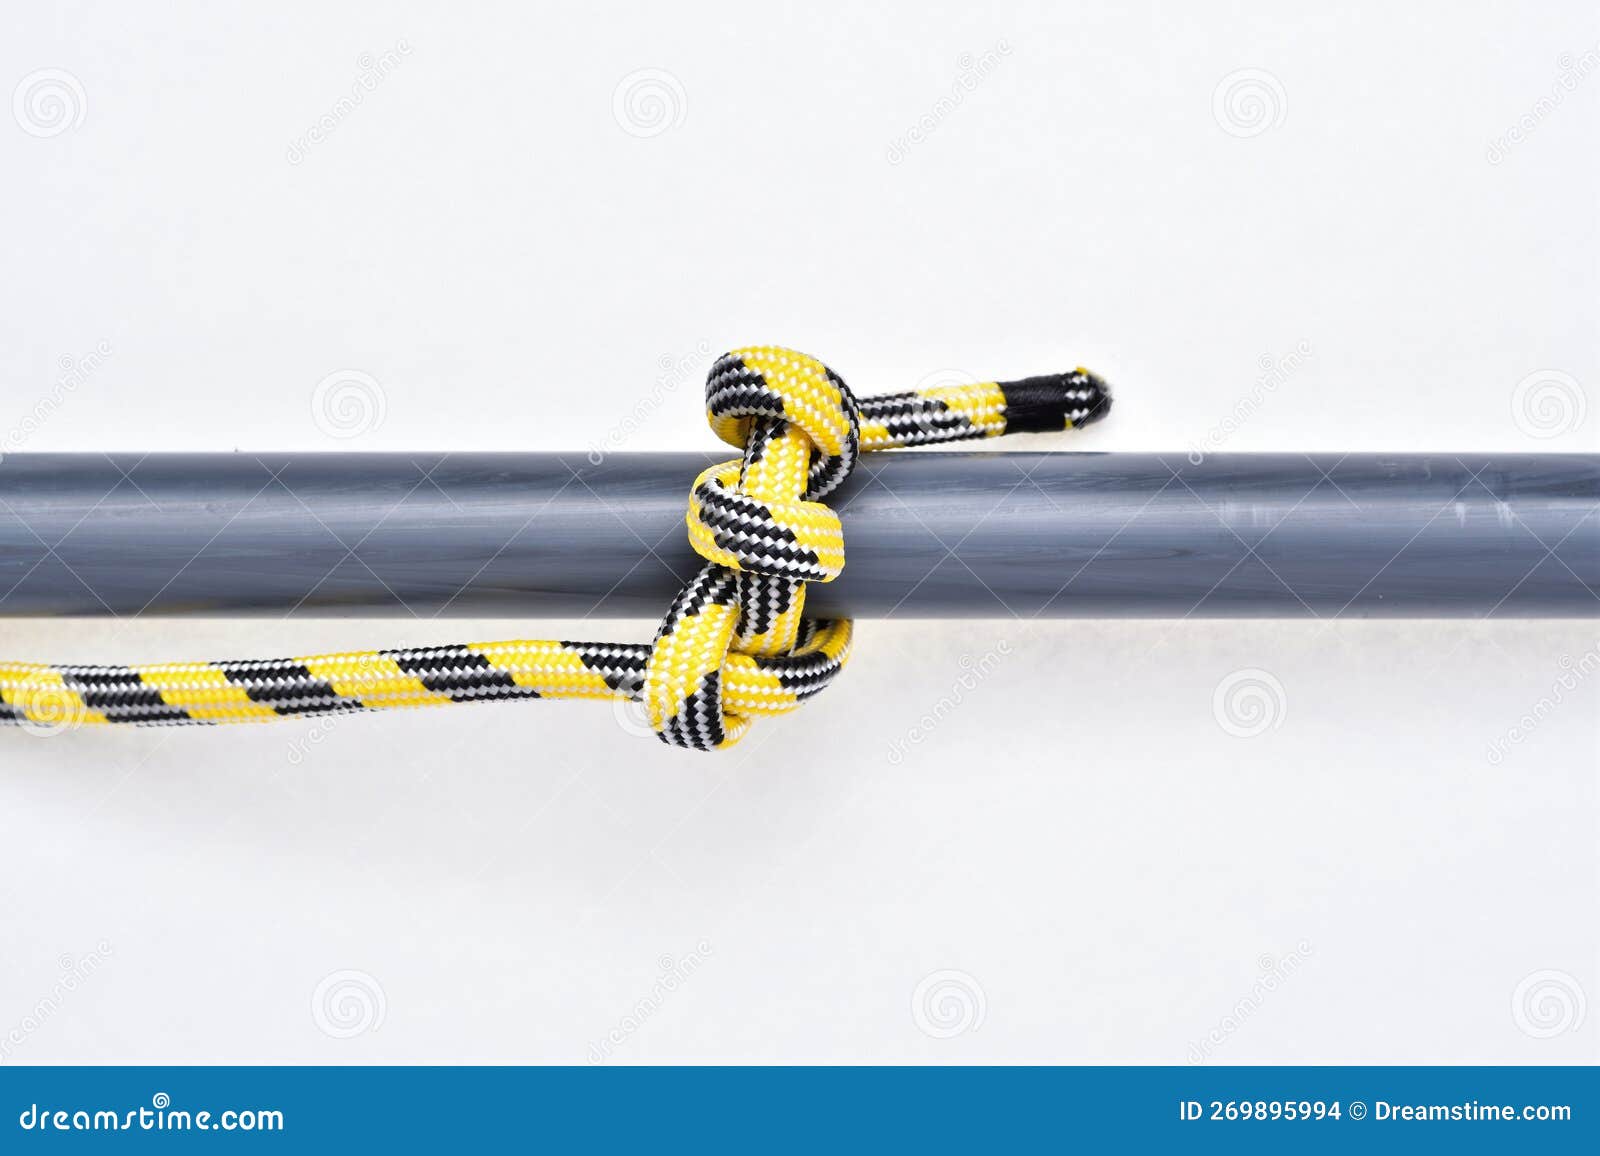 https://thumbs.dreamstime.com/z/timber-hitch-knot-yellow-black-nylon-rope-white-background-269895994.jpg